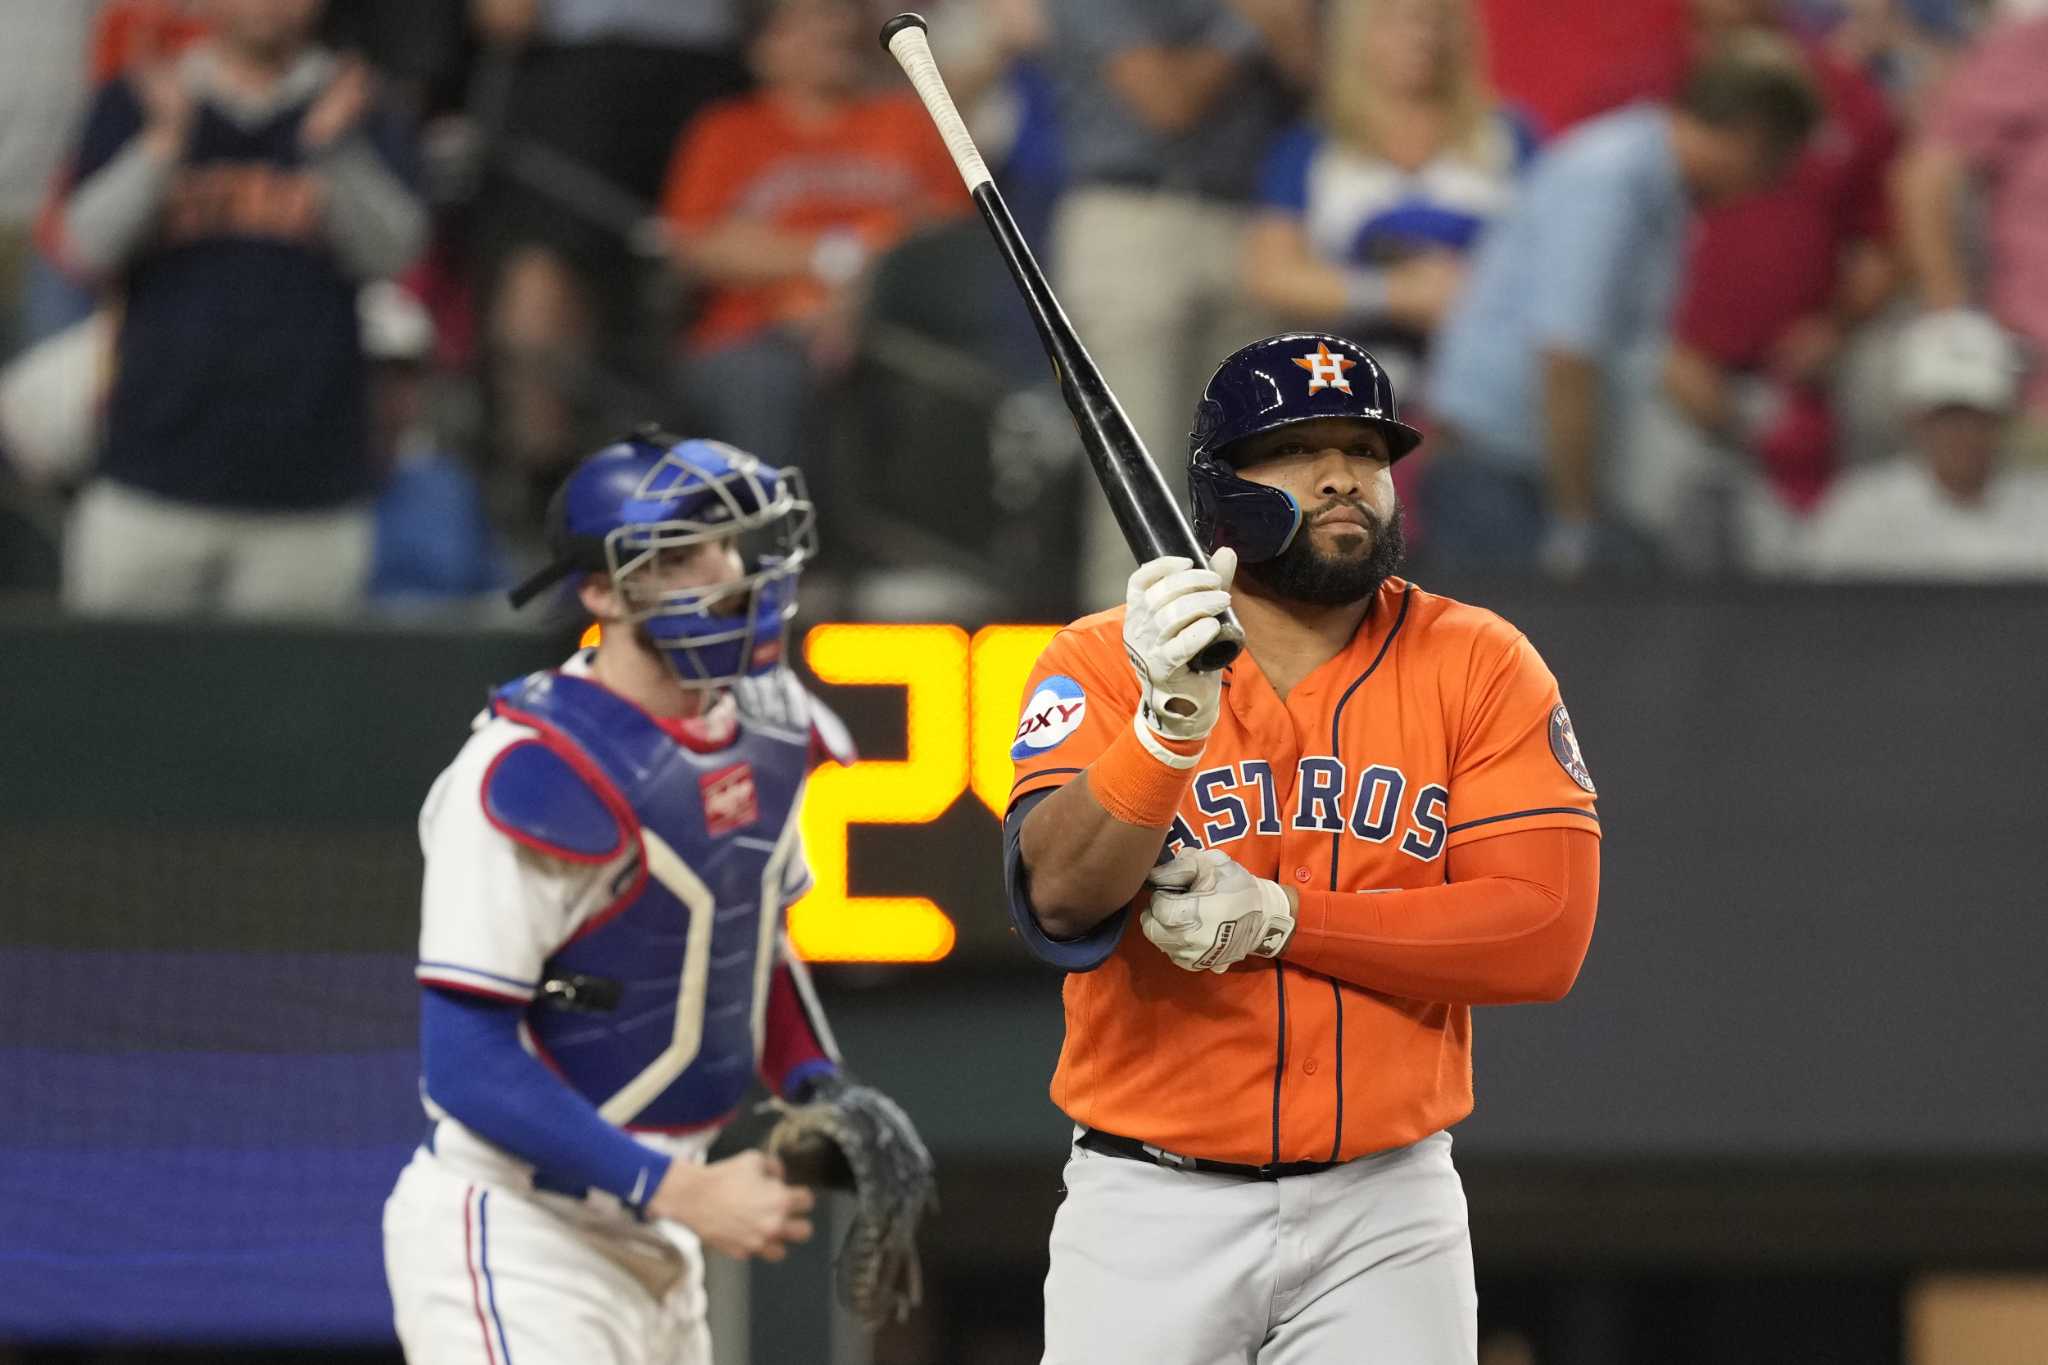 Fueled by powerful bats, Astros lift off to top of AL